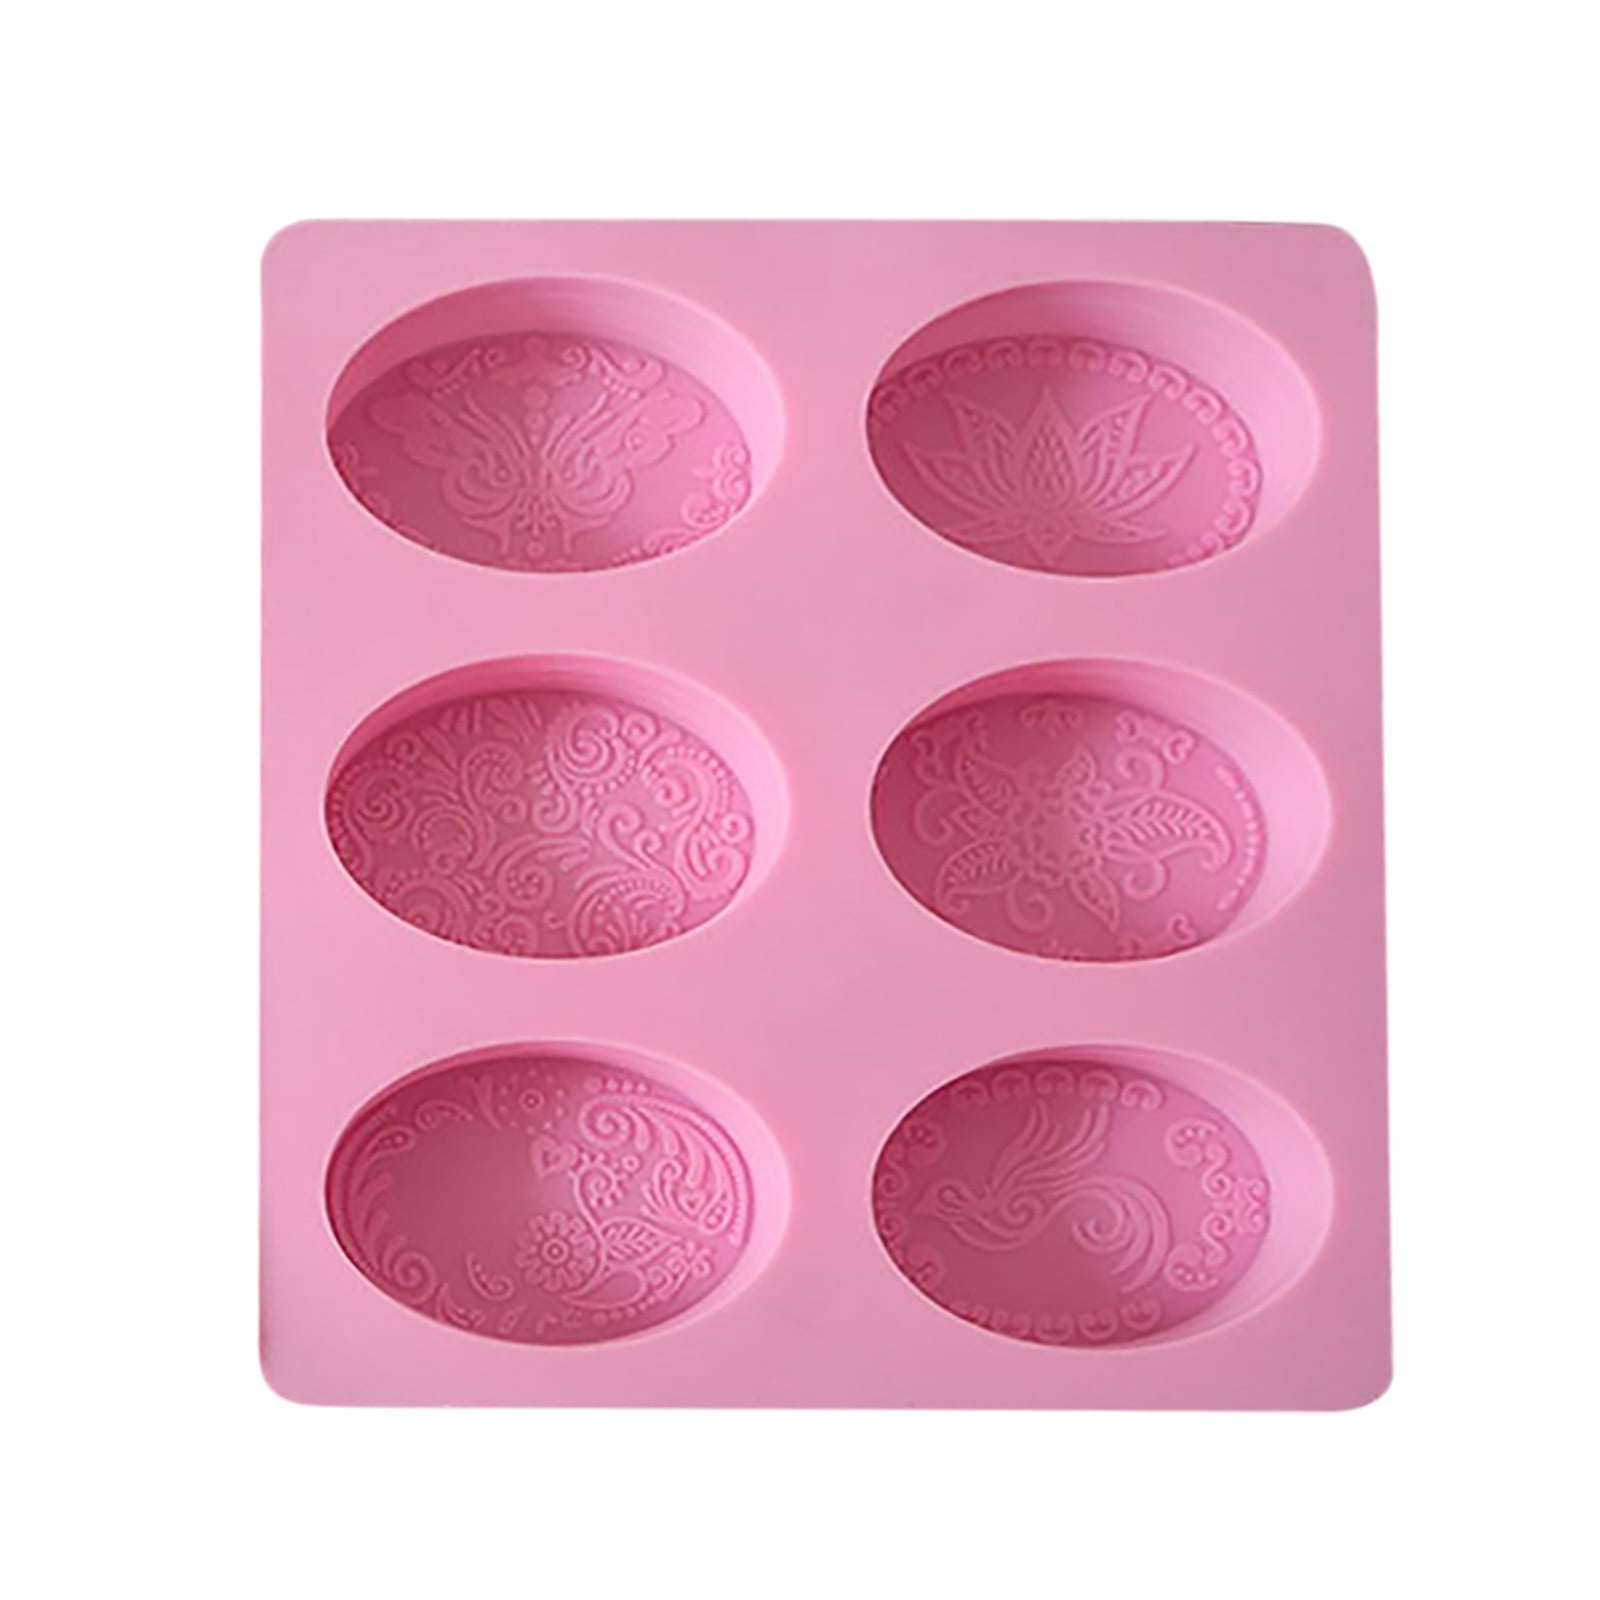 Silicone 3D Chocolate Soap Mold Cake Candy Baking Mould Baking Pan Tray Molds 